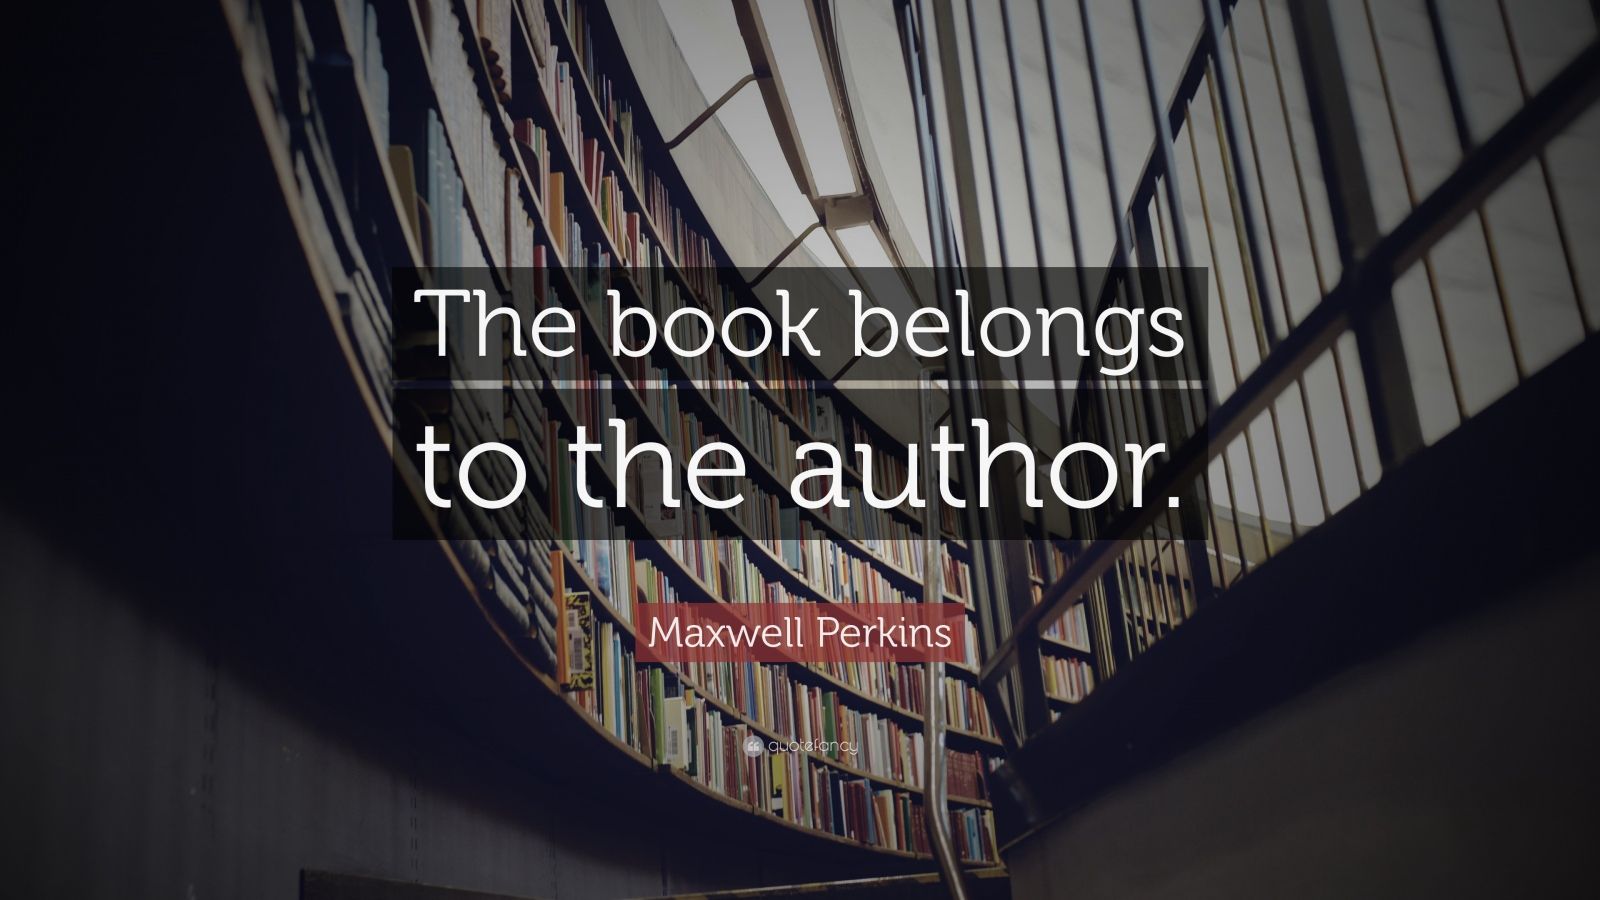 Maxwell Perkins Quote: “The book belongs to the author.”